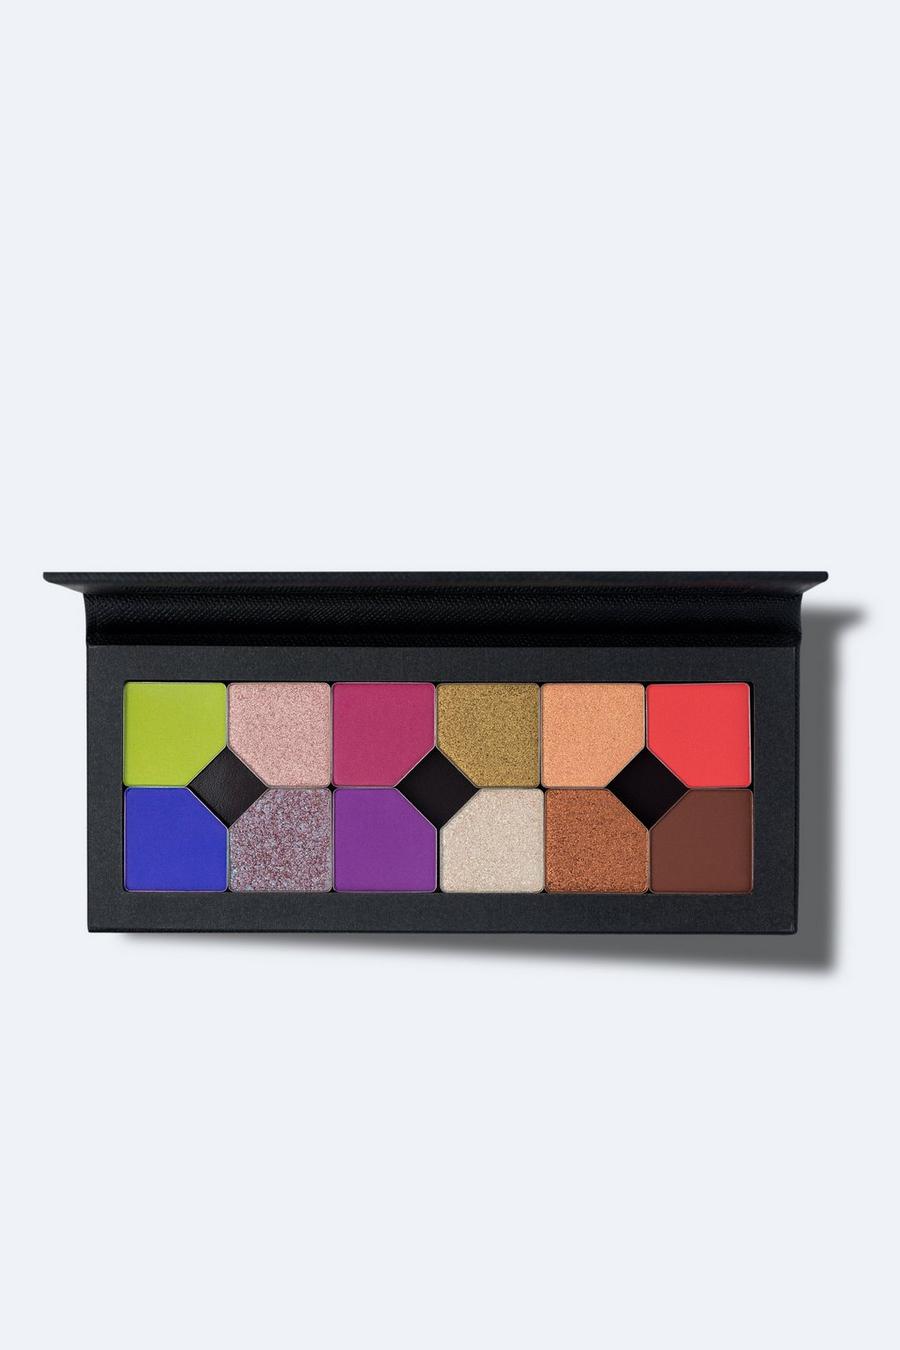 Nasty Gal Beauty Pigment Palette